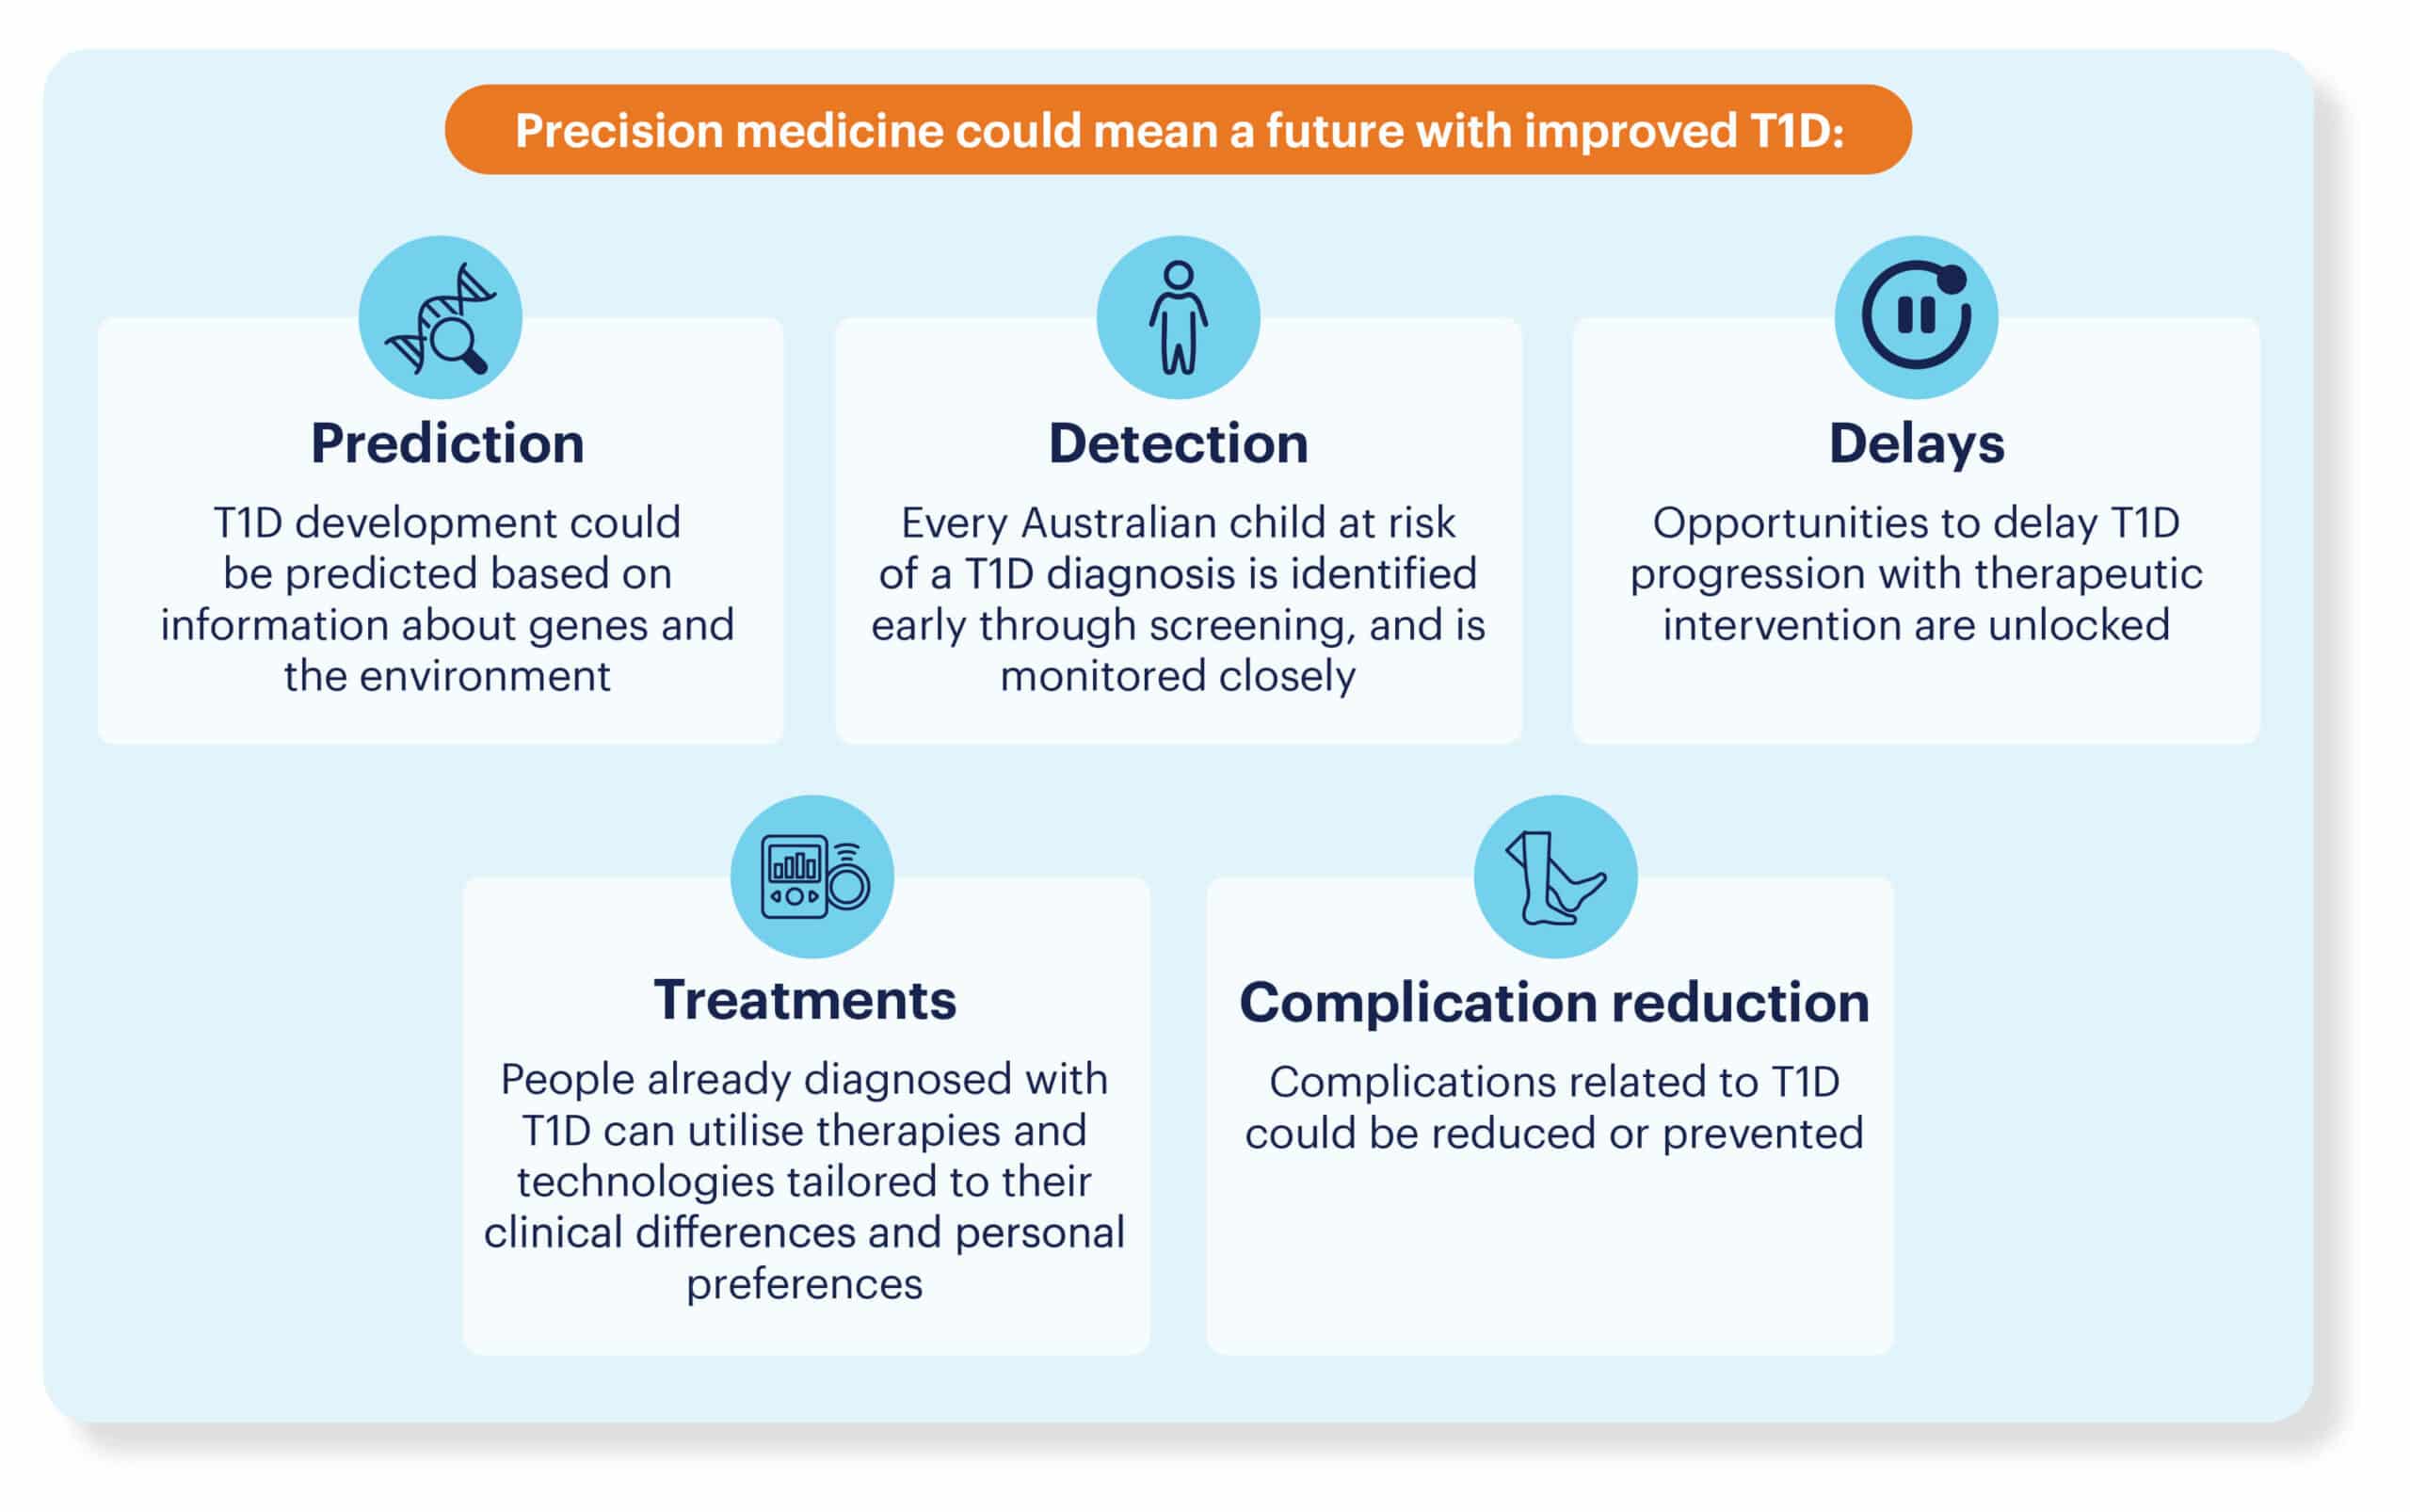 Image is an infographic depicting the benefits that precision medicine could being to T1D care. The text says: Prediction: T1D development could be predicted based on information about genes and the environment. Detection: Every Australian child at risk of a T1D diagnosis is identified early through screening, and is monitored closely. Delays: Opportunities to delay progression with therapeutic intervention are unlocked. Treatments: People already diagnosed with T1D can utilise therapies and technologies tailored to their clinical differences and personal preferences. Complication reduction: Complications related to T1D could be reduced or prevented. 